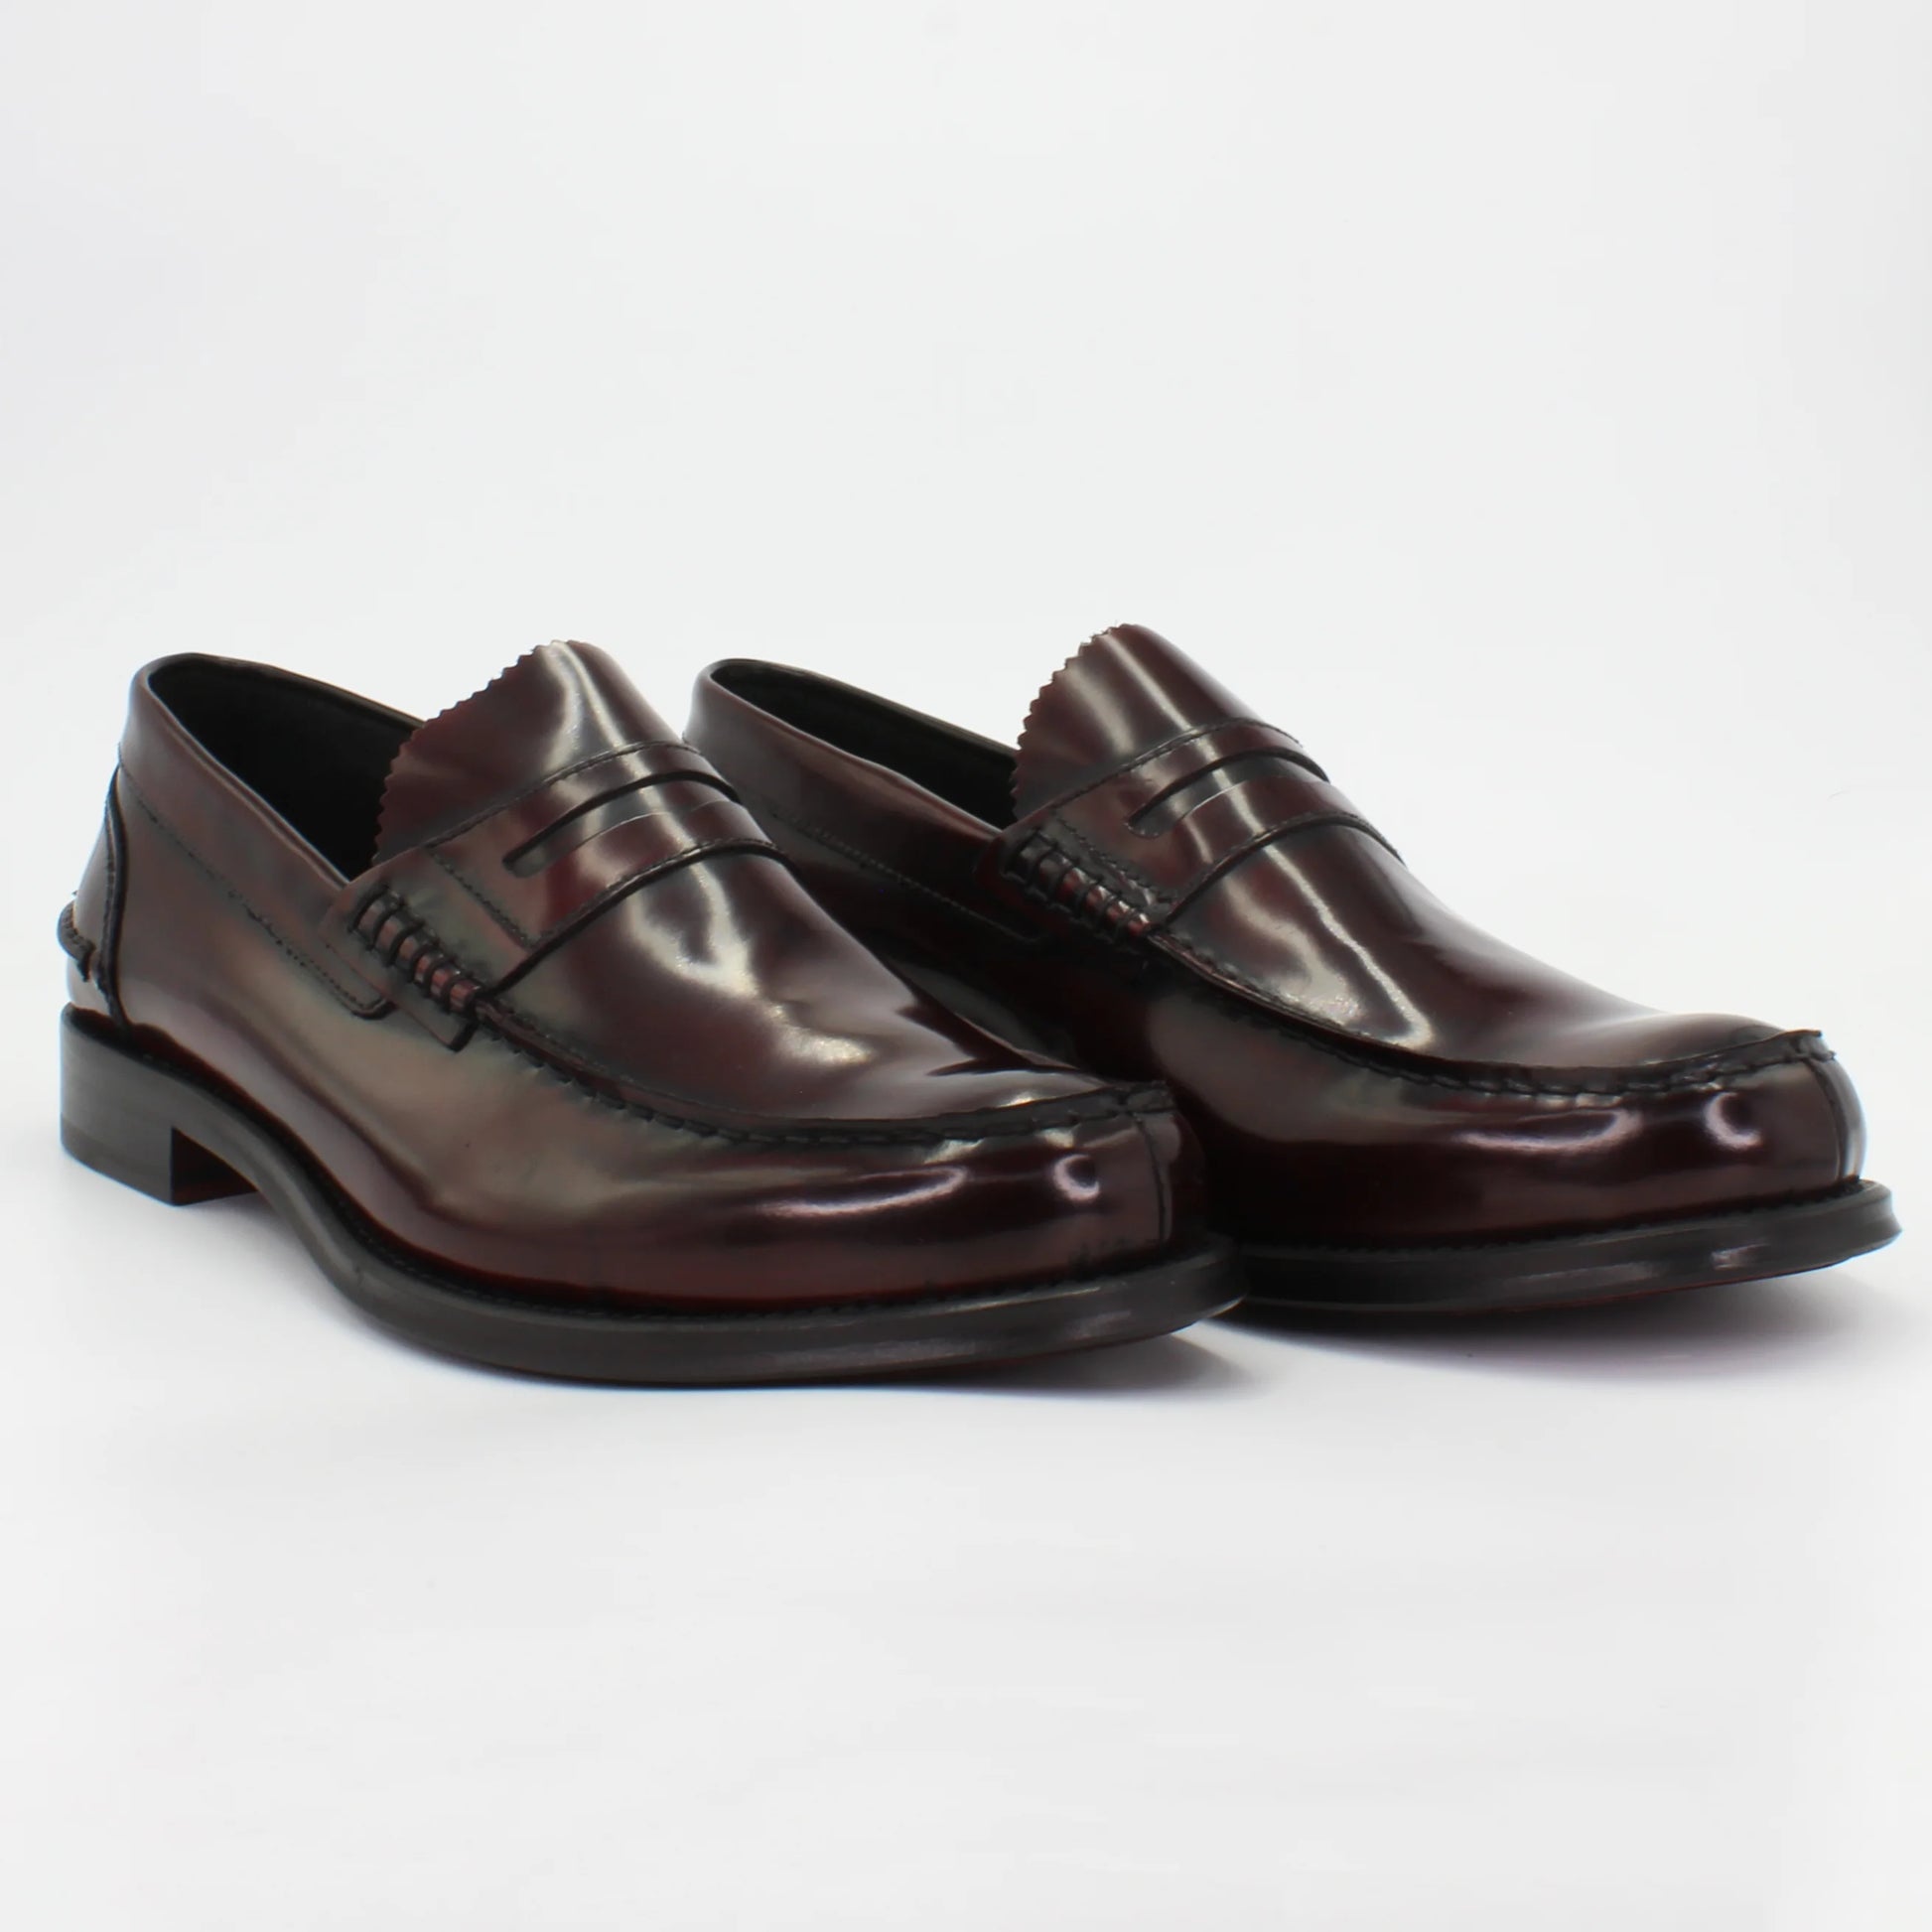 Shop Handmade Italian Leather Penny Loafer in Bordeaux (BRU8826) or browse our range of hand-made Italian shoes for men in leather or suede in-store at Aliverti Cape Town, or shop online. We deliver in South Africa & offer multiple payment plans as well as accept multiple safe & secure payment methods.